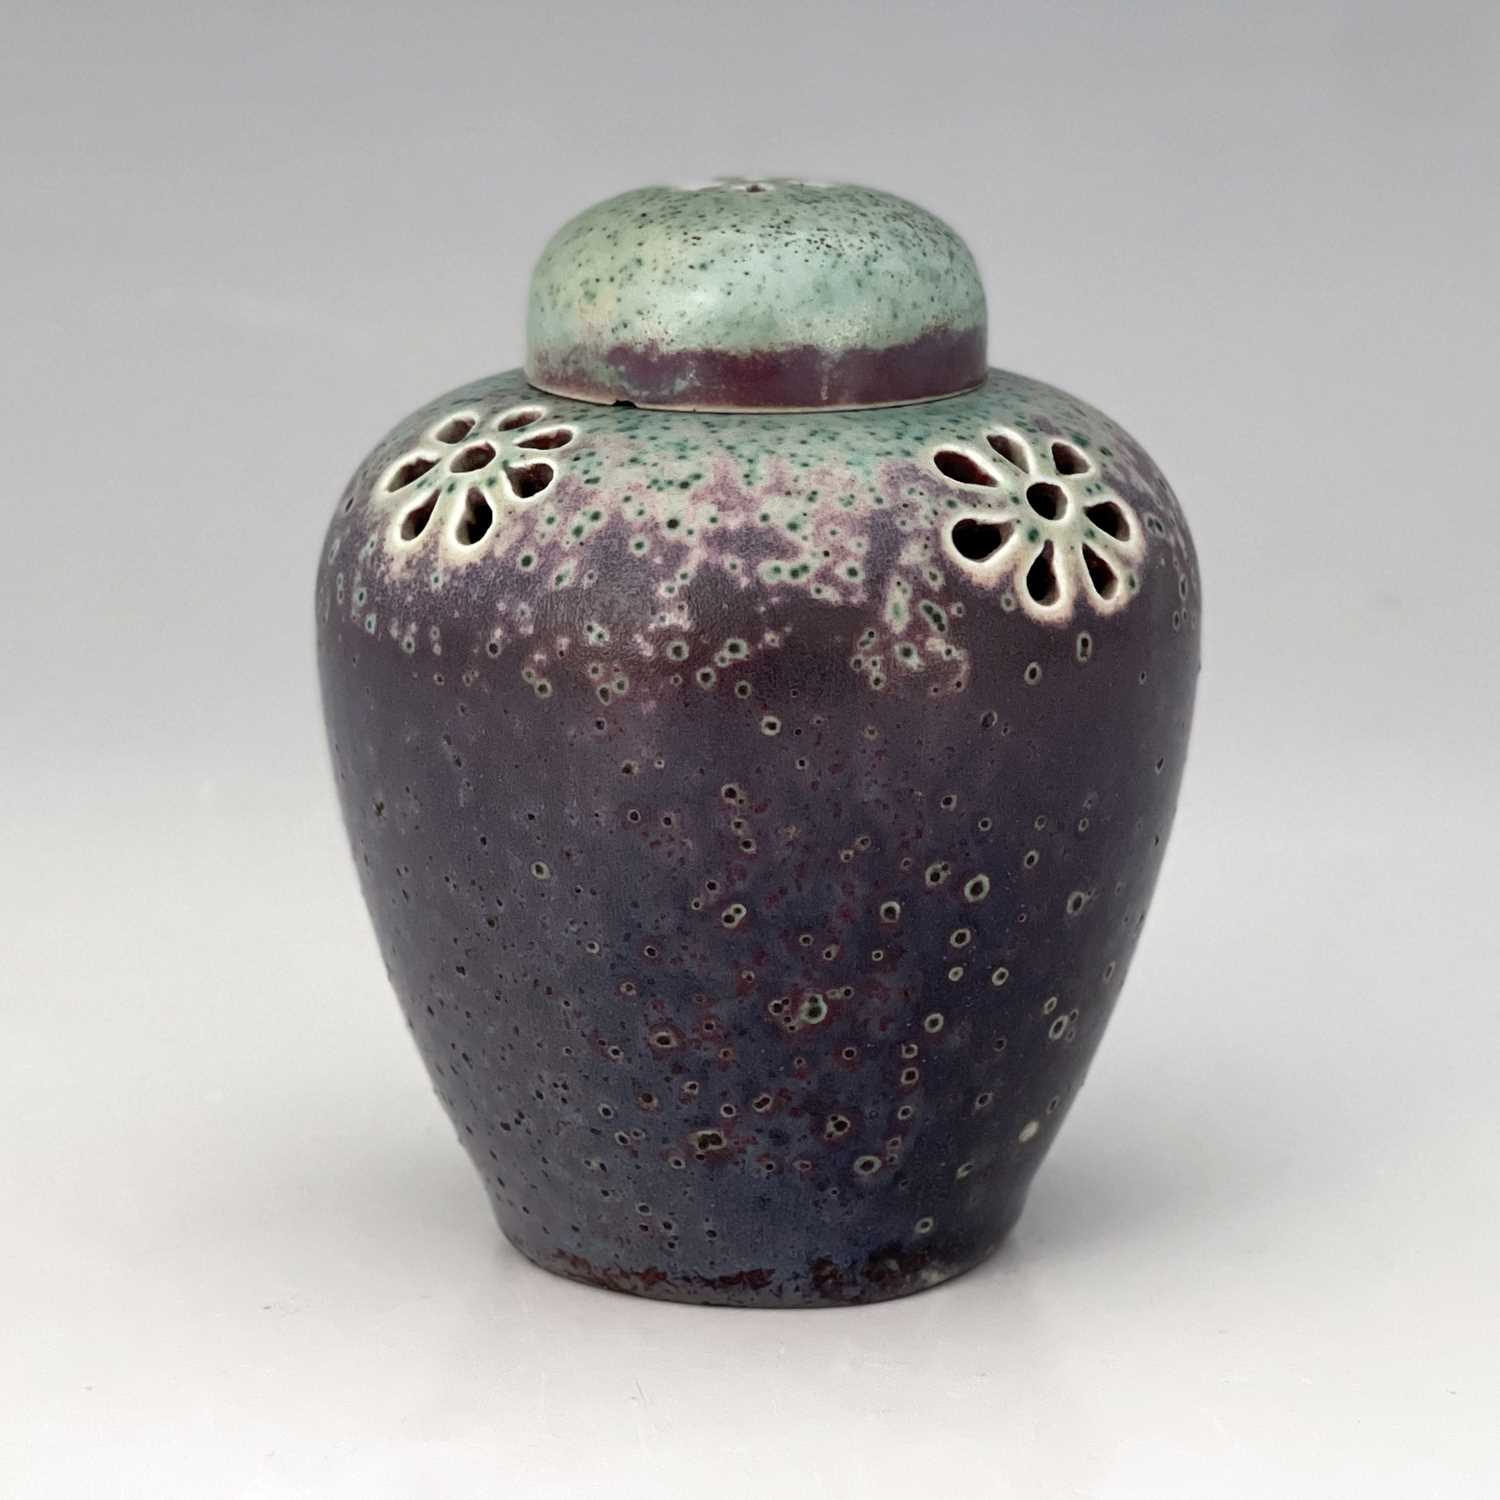 Ruskin Pottery, a small High Fired reticulated ginger jar and cover, circa 1905, pierced with six